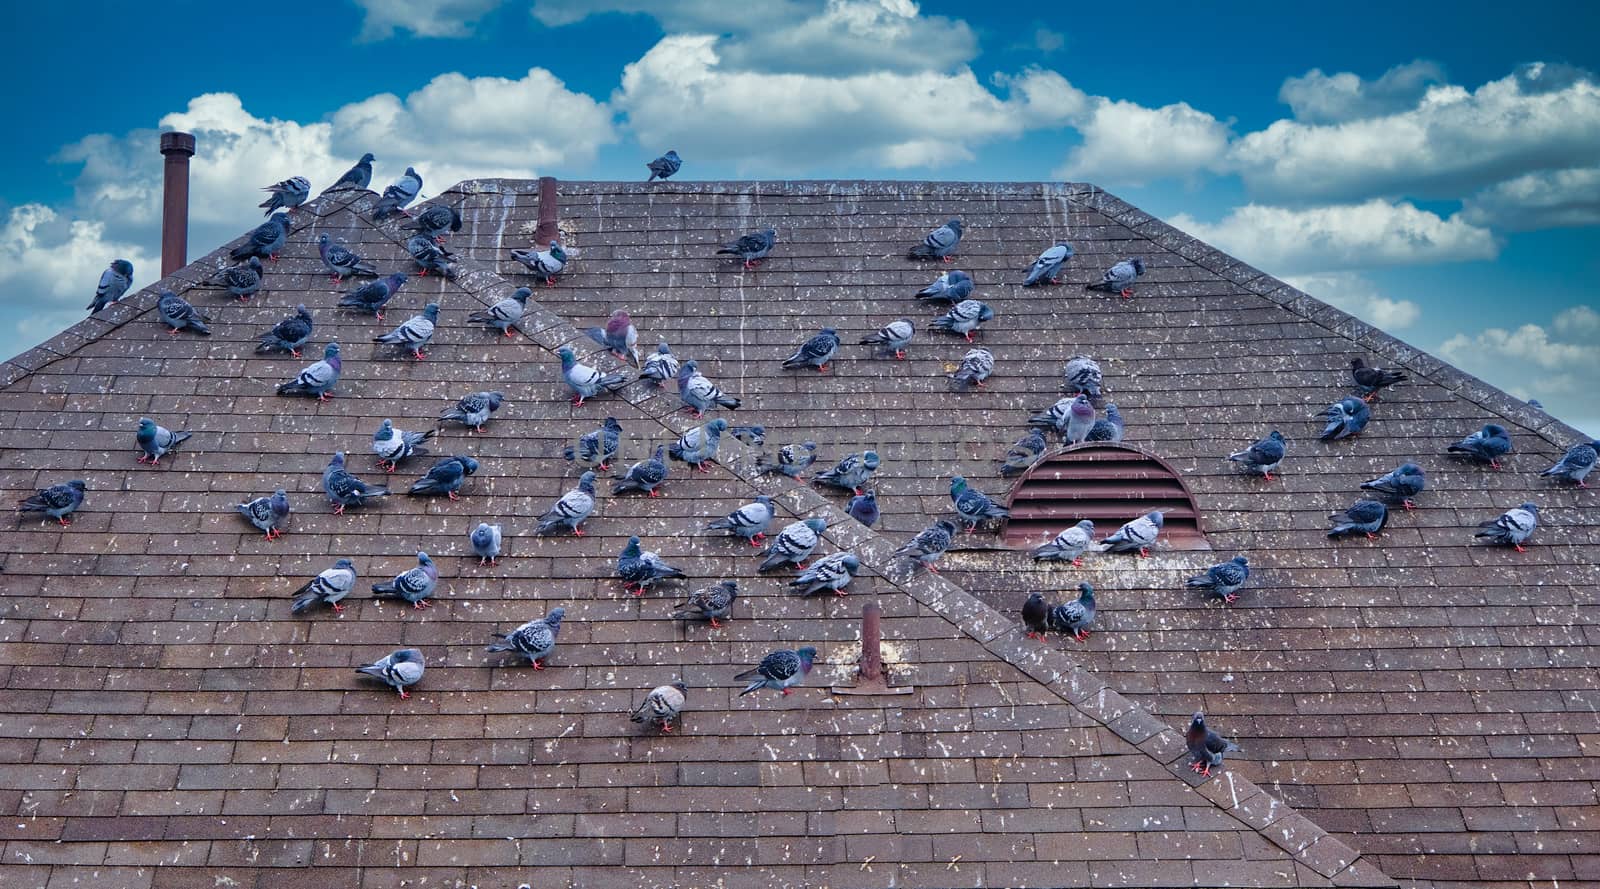 Flock of Pigeons on Roof by dbvirago